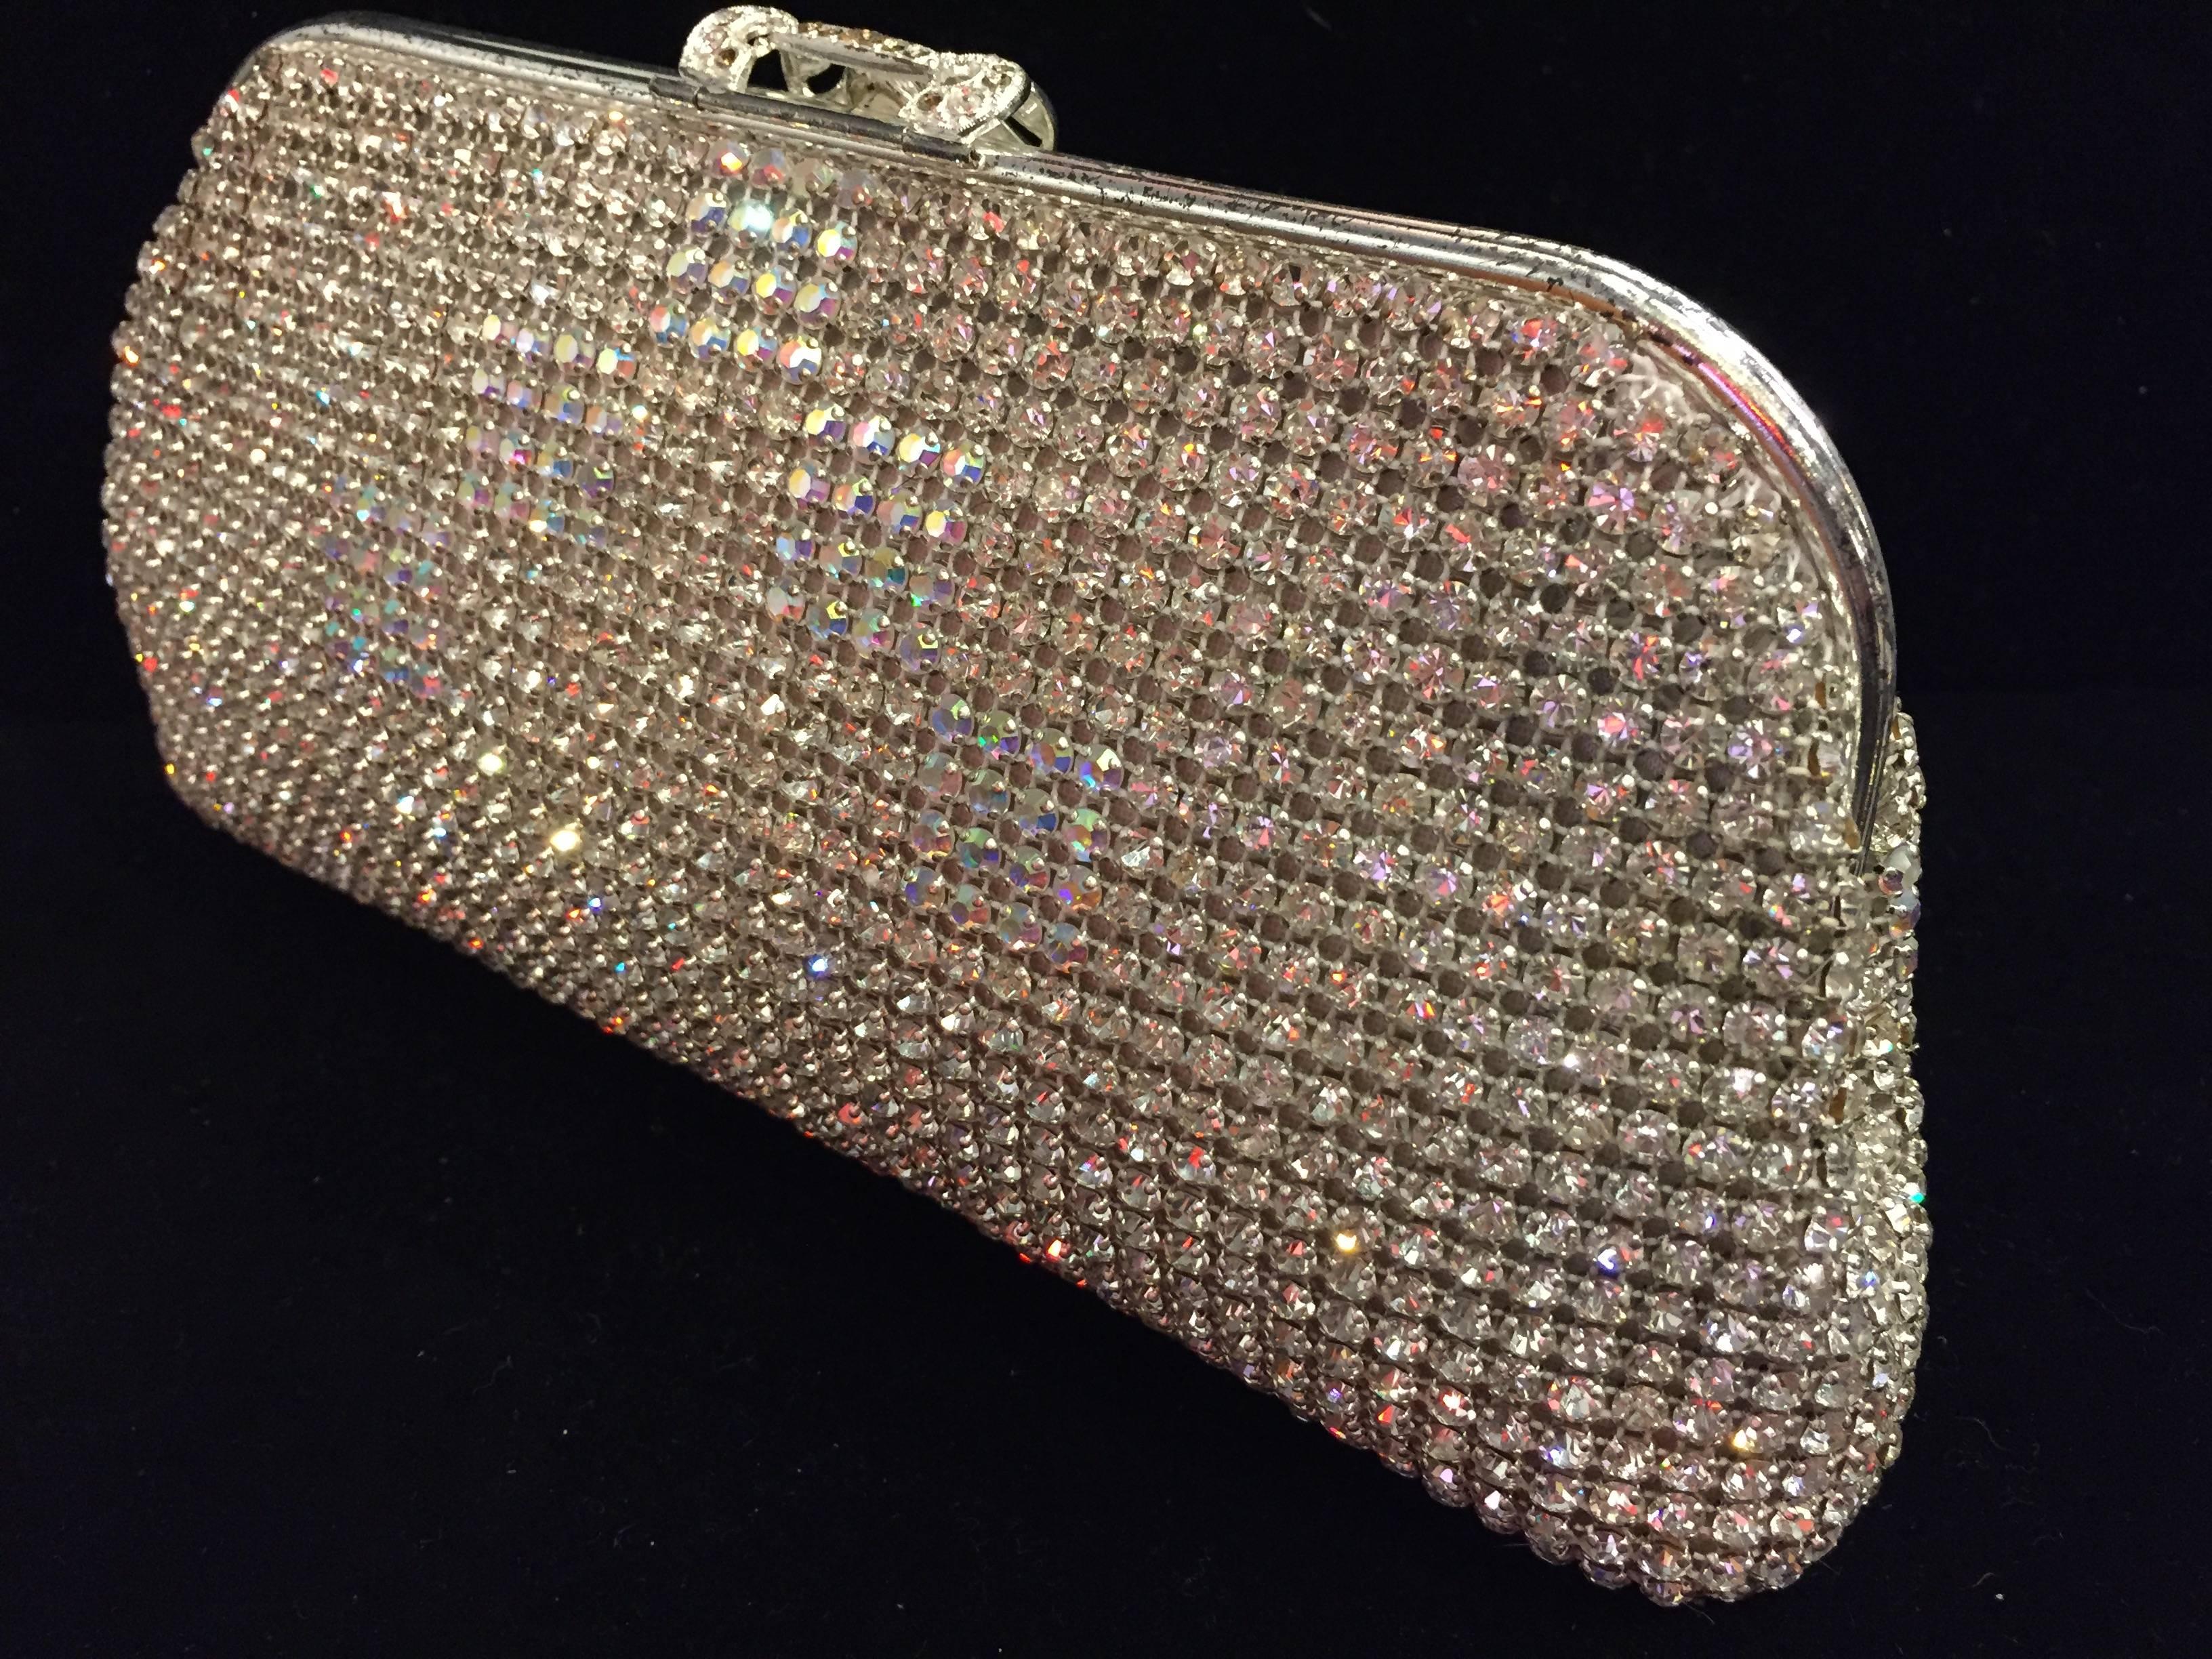 A lovely 1950s Johann Becker rhinestone encrusted convertible evening bag: chain handle tucks inside bag to be used as a clutch. Clean lining.  9